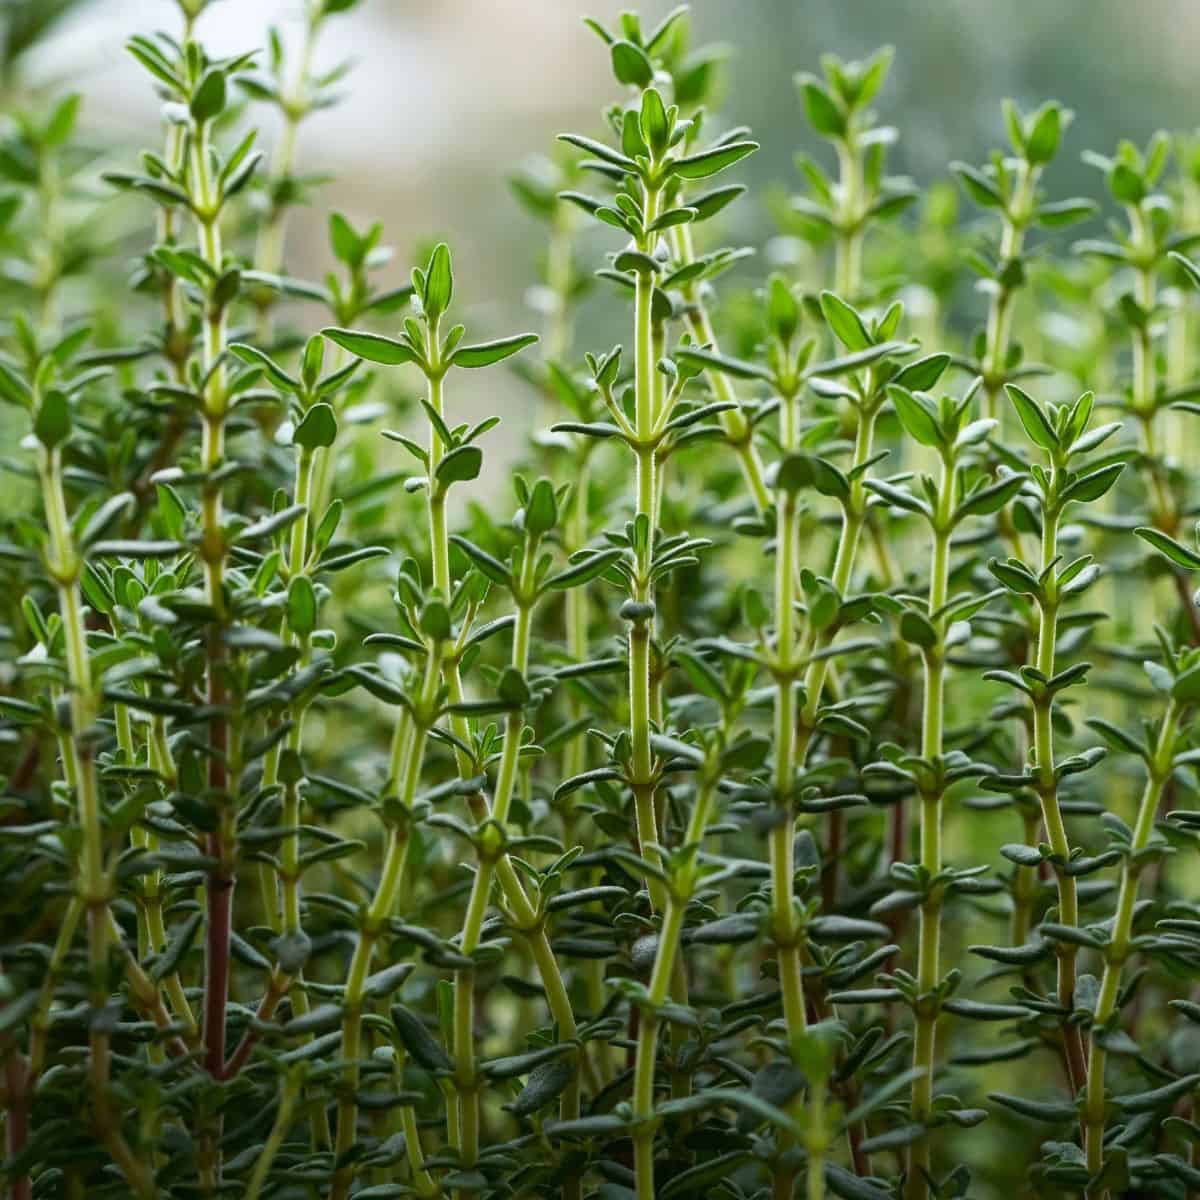 A crop of young, green thyme plants.